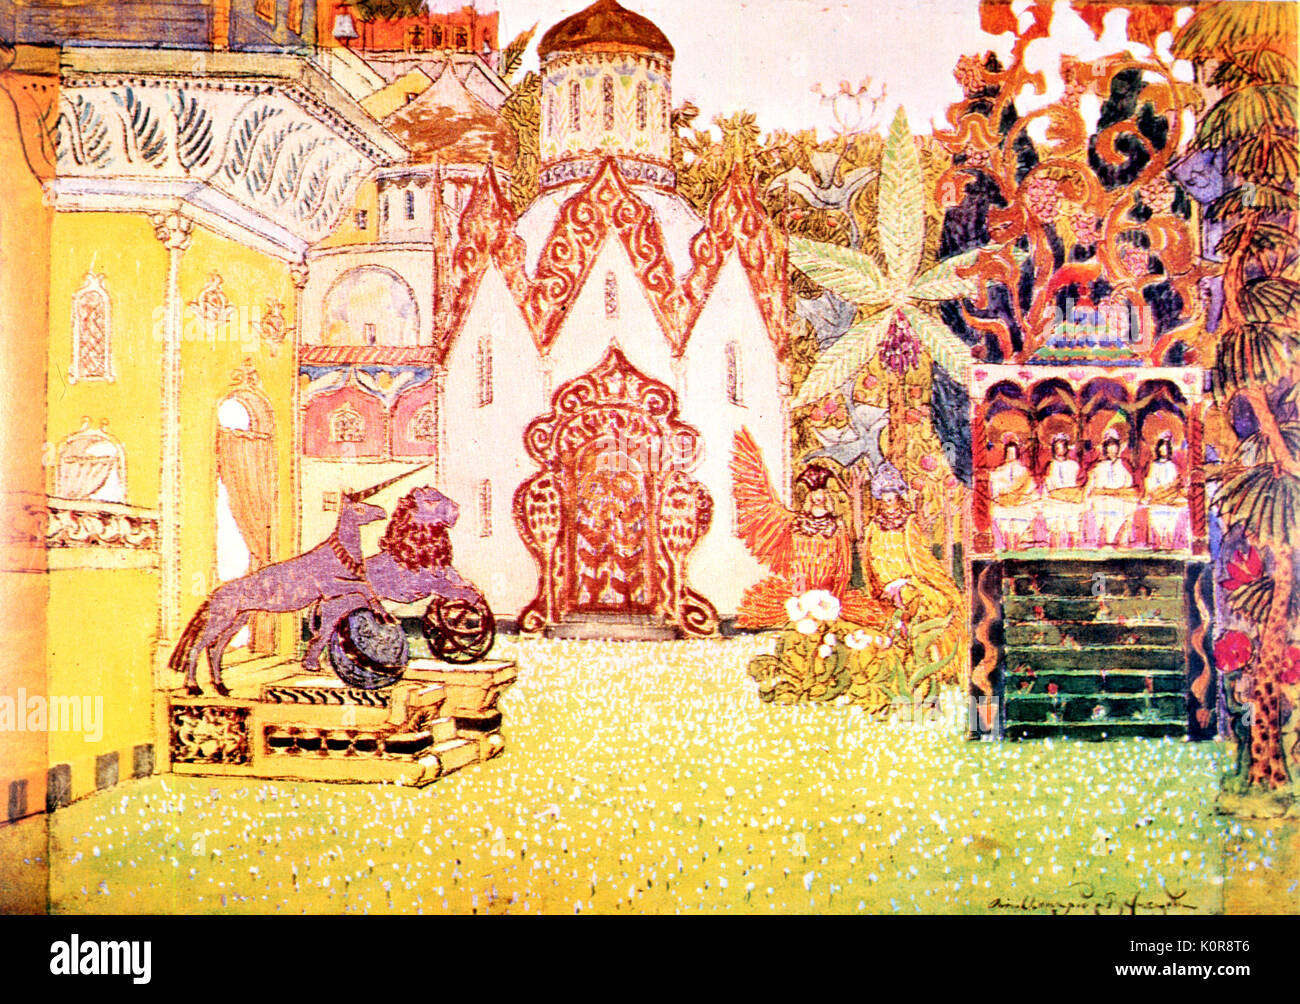 Rimsky-Korsakov. 'The Legend of the Invisible City of Kitezh'-first performance.Stage design to 2nd scene of Act IV (Transfigurated Kitezh) by A.M.Vasnetsov (1856-1933) - St.Petersburg 1907; Conductor F.M.Blumenfeld Russian composer (1844-1908) Stock Photo